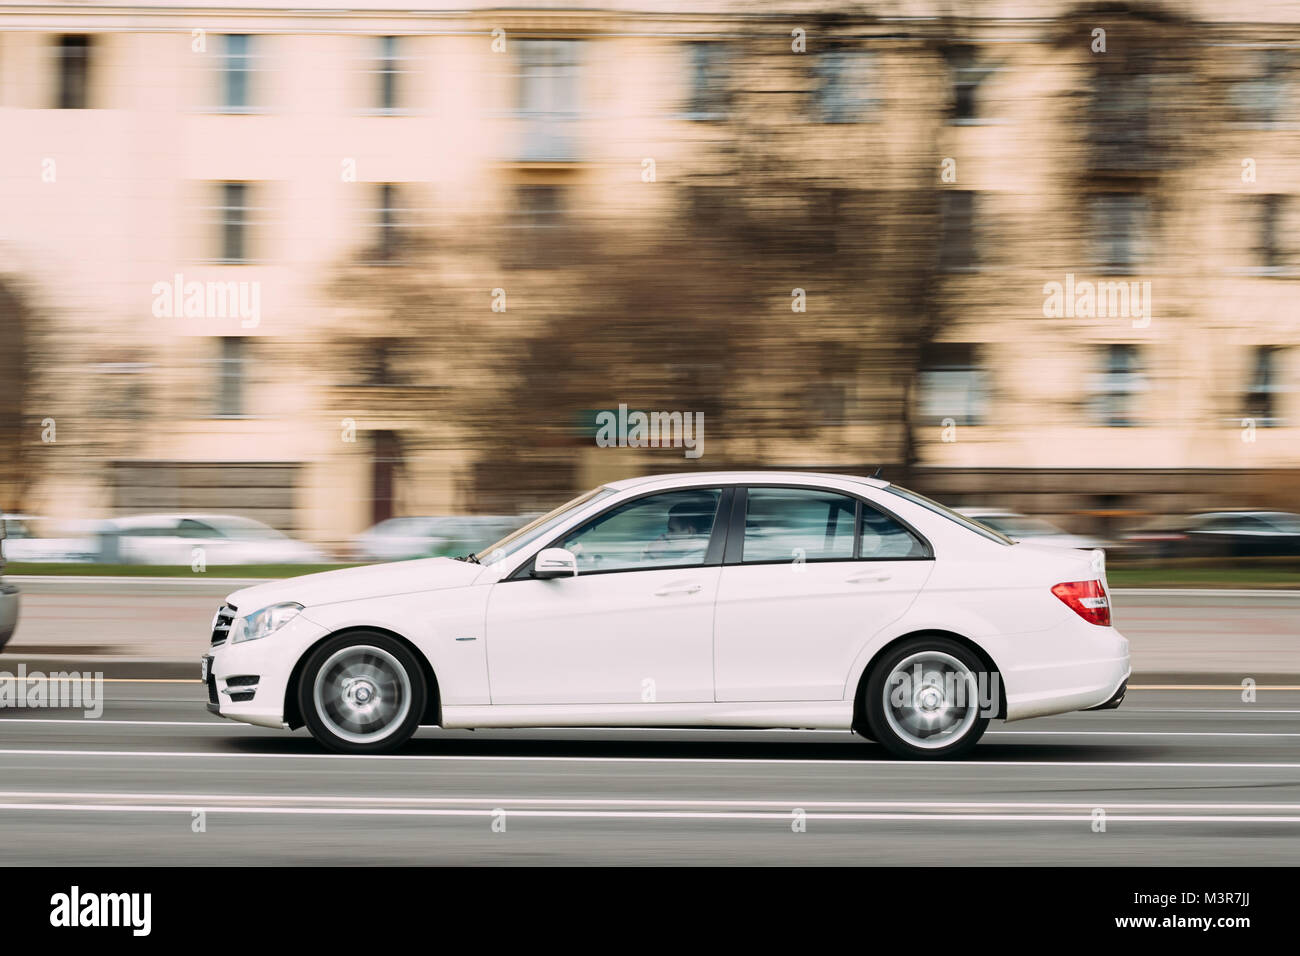 Minsk, Belarus - April 7, 2017: White Color Mercedes-benz C-class In Fast Motion On Street. Stock Photo